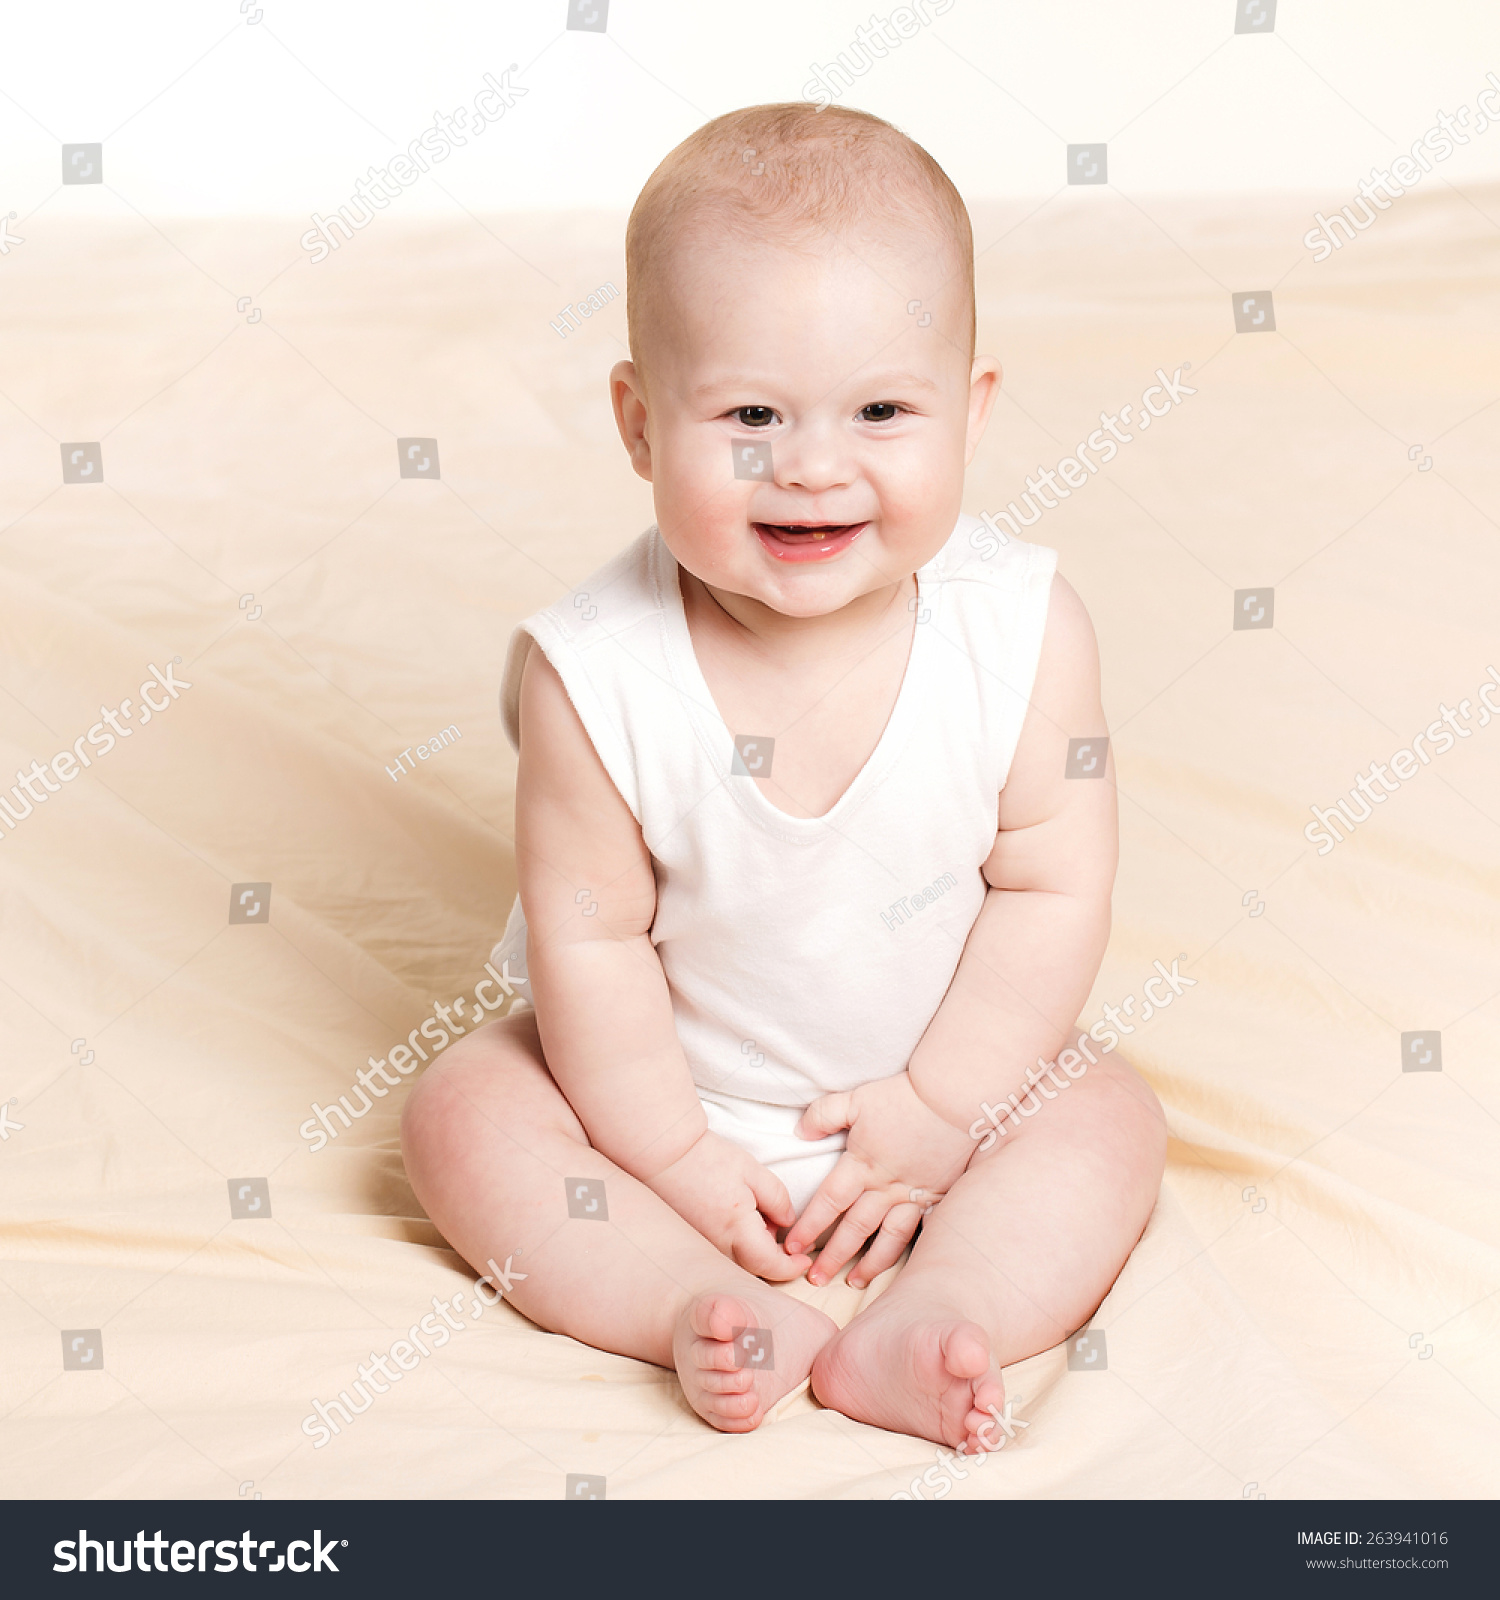 Adorable Baby Sitting Looking Aside Over Stock Photo (Royalty Free ...